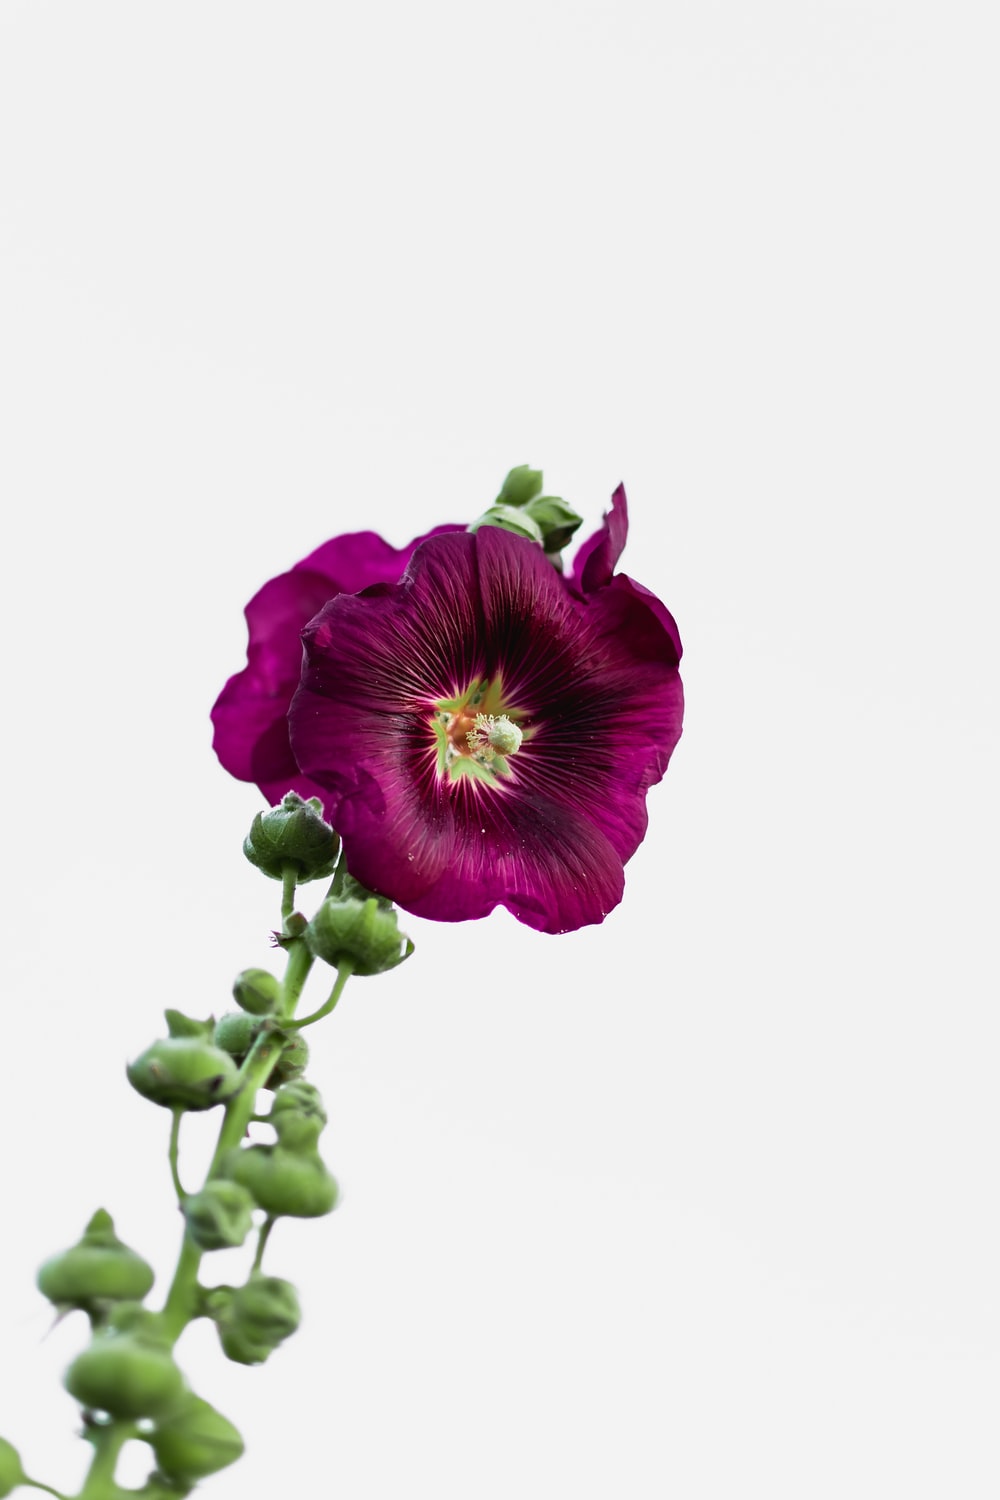 Single Flower Picture. Download Free Image